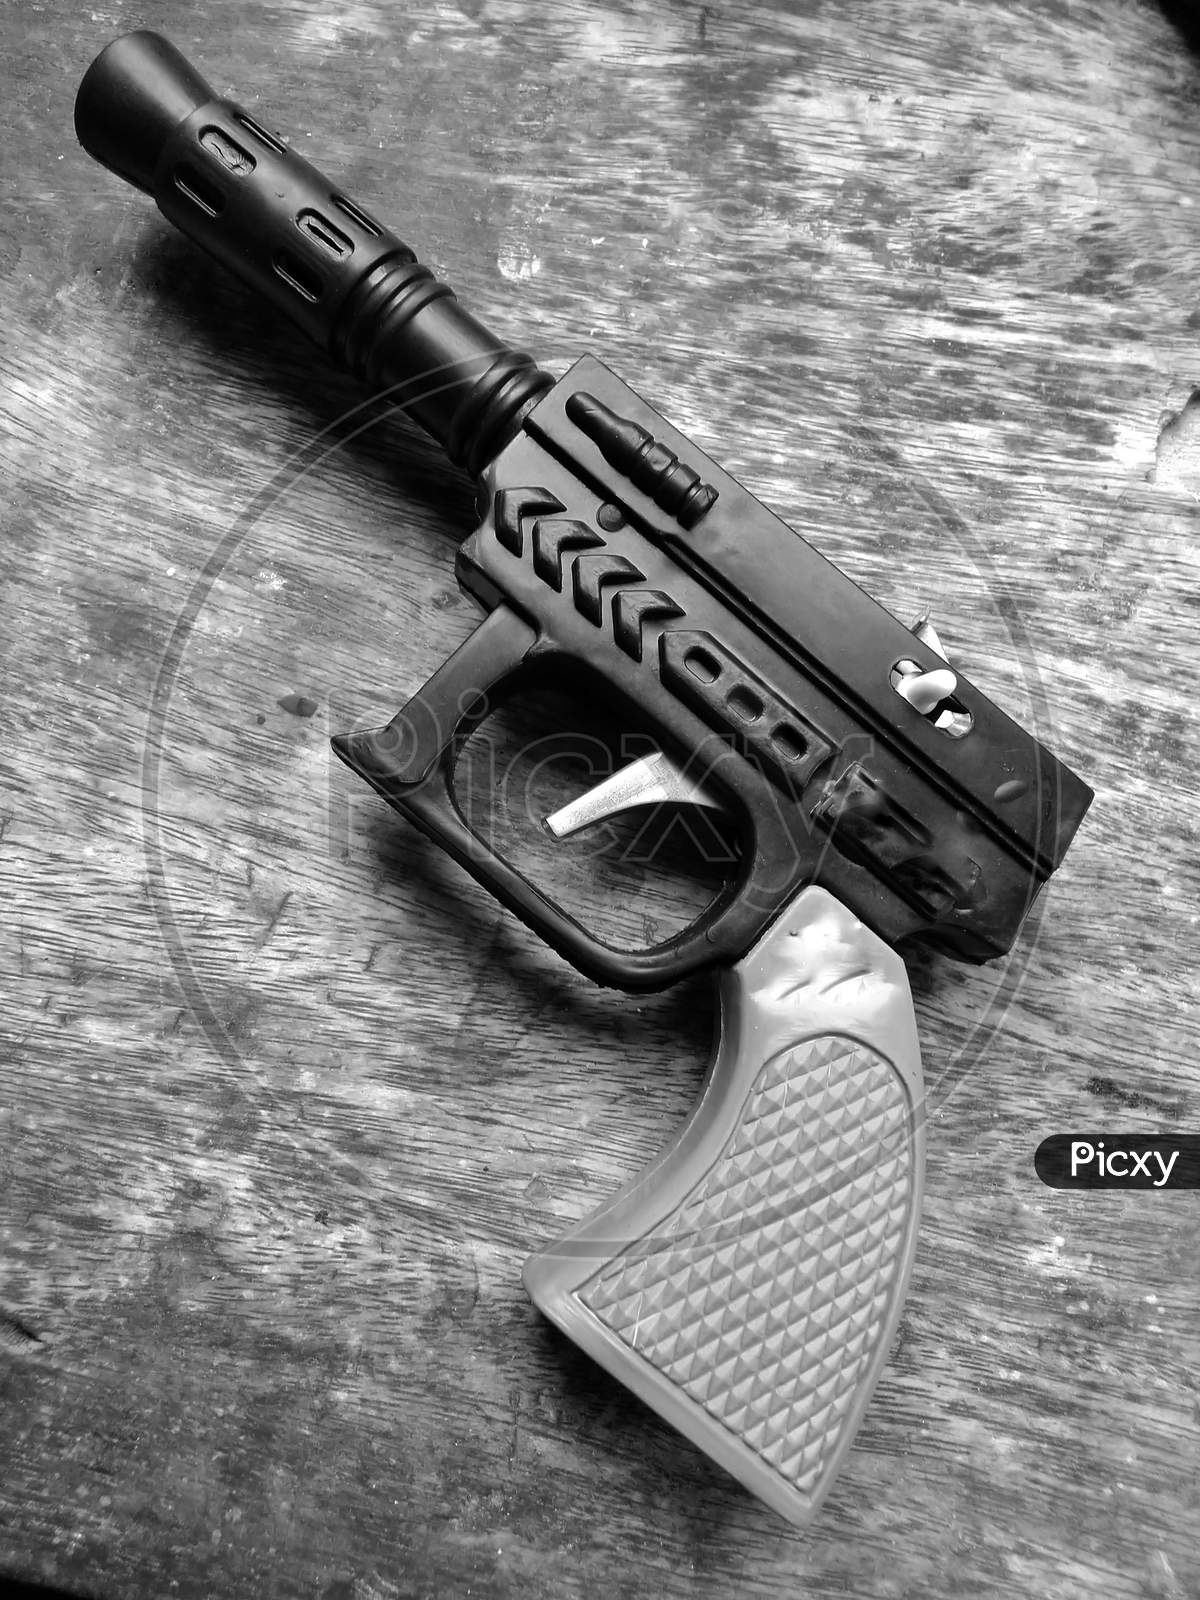 A close view of baby toy gun